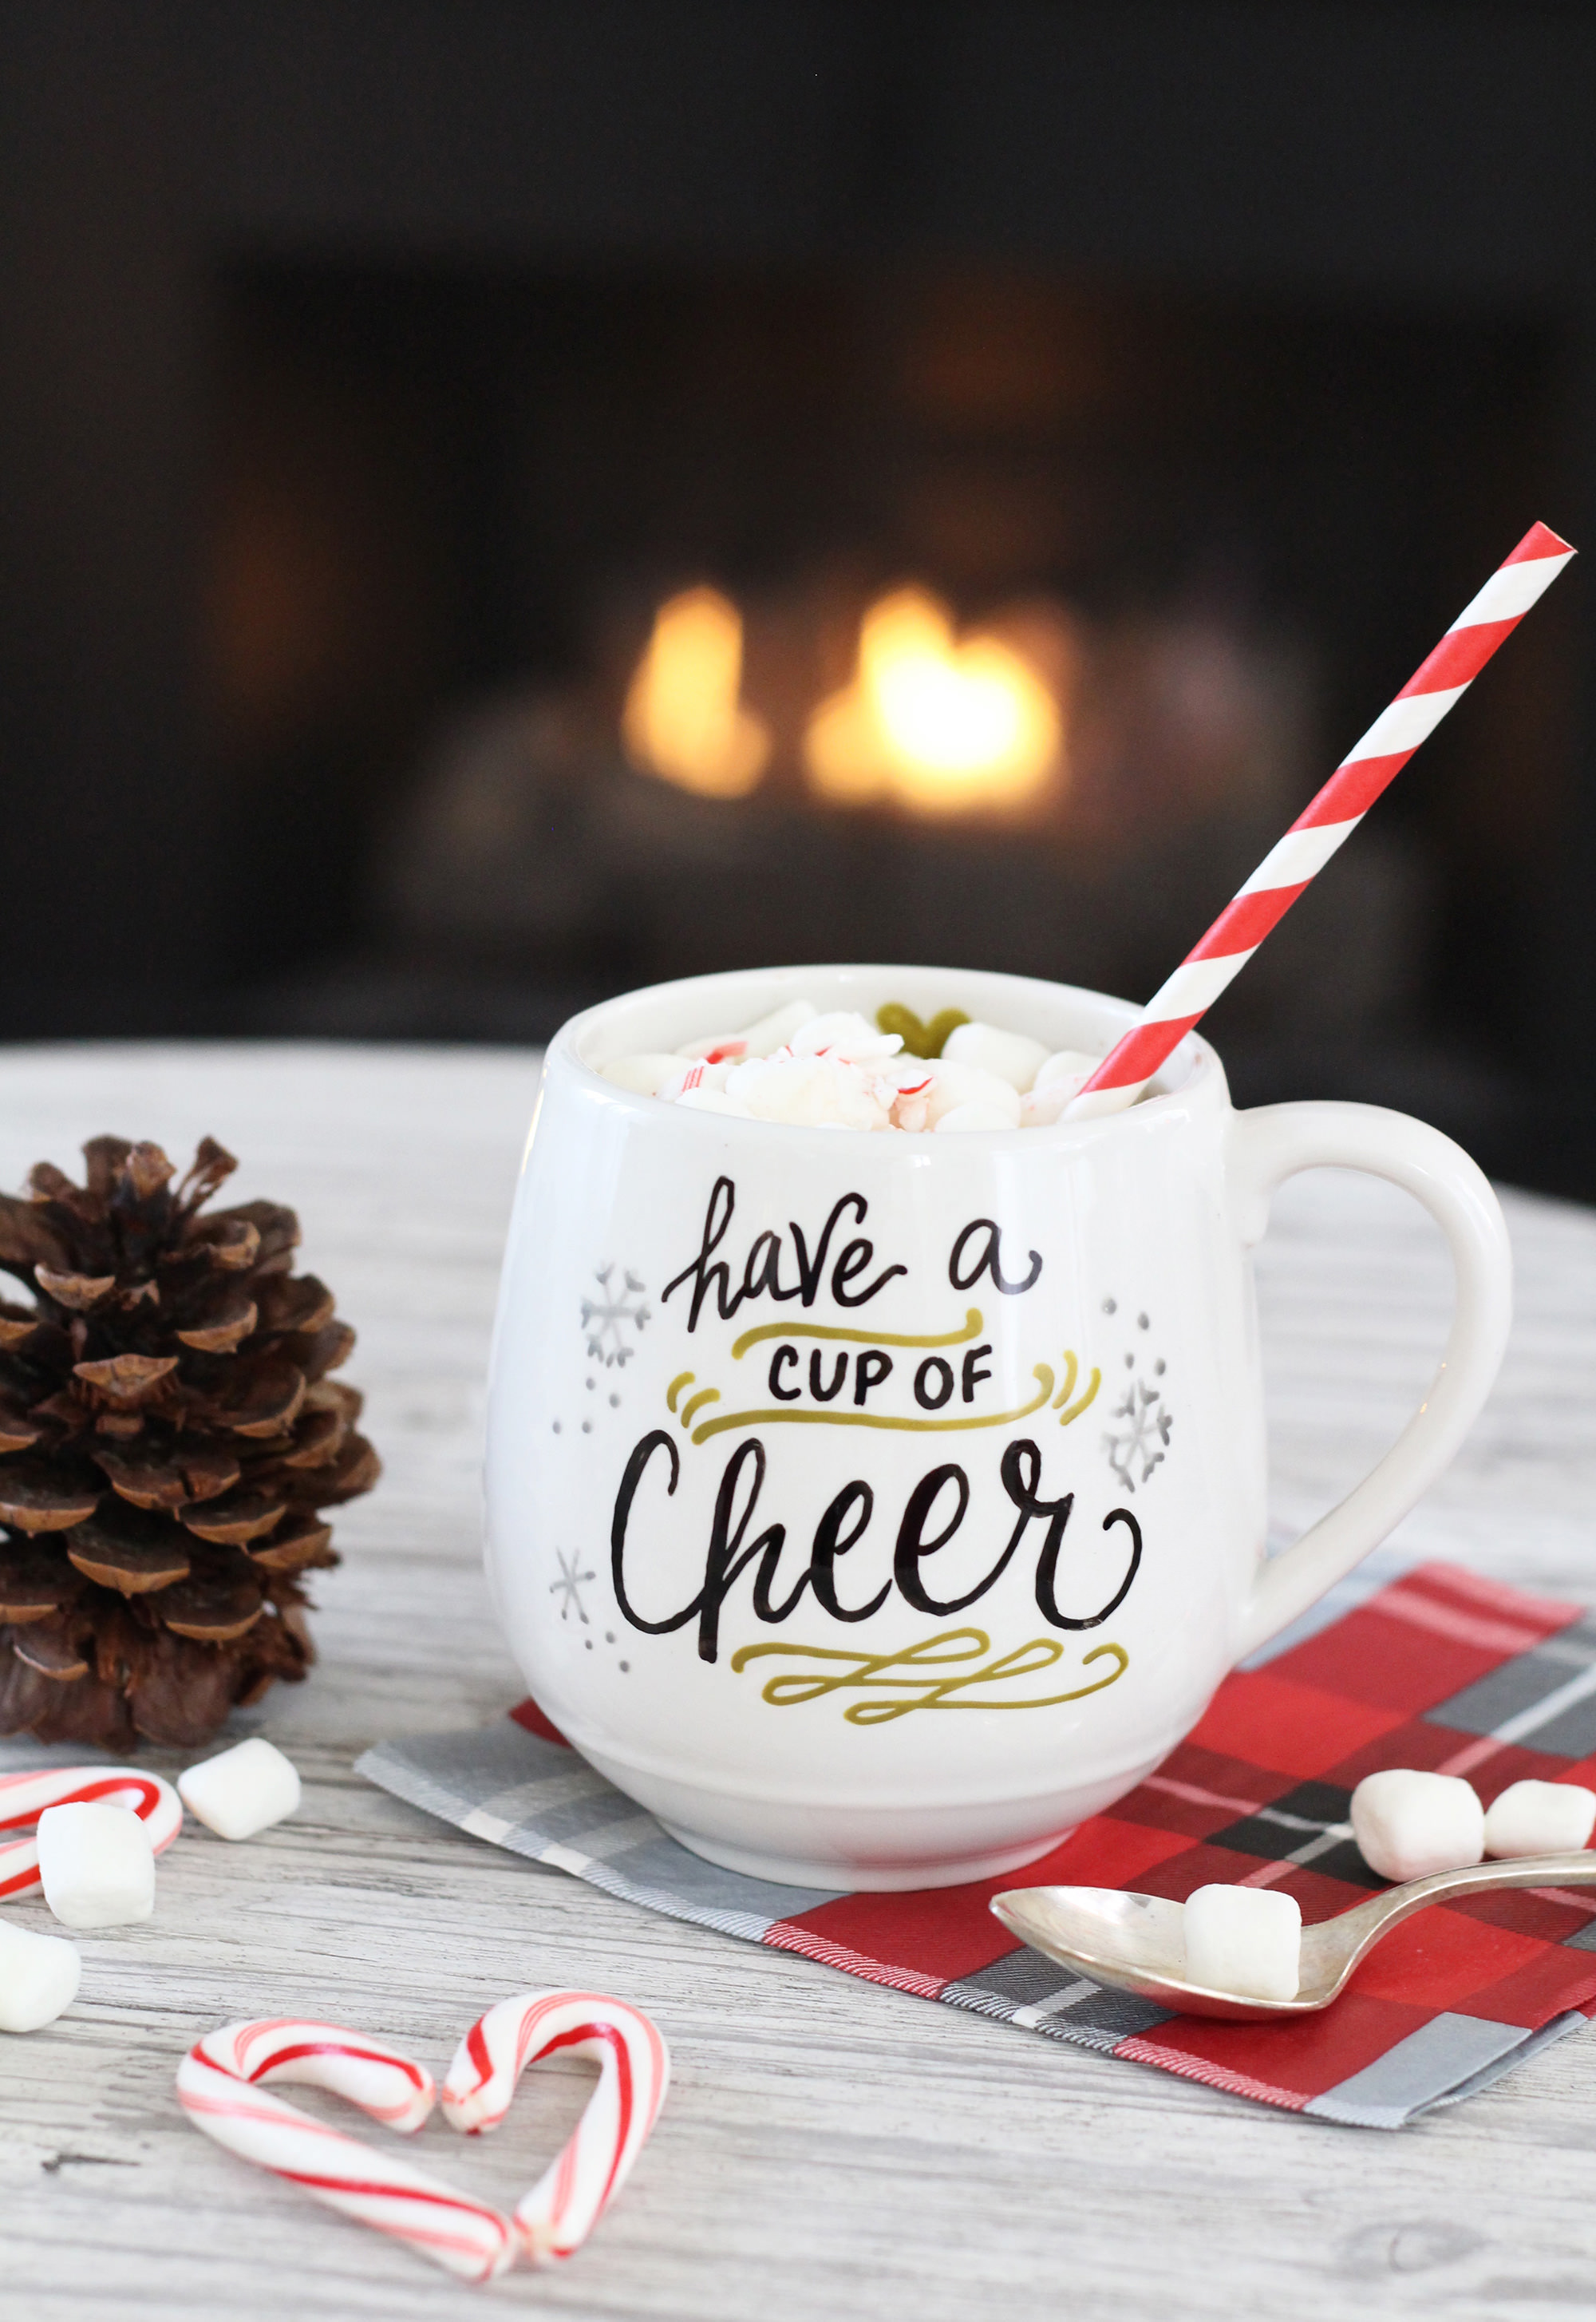 Have a cup of cheer - in a customized, DIY, hand lettered mug!